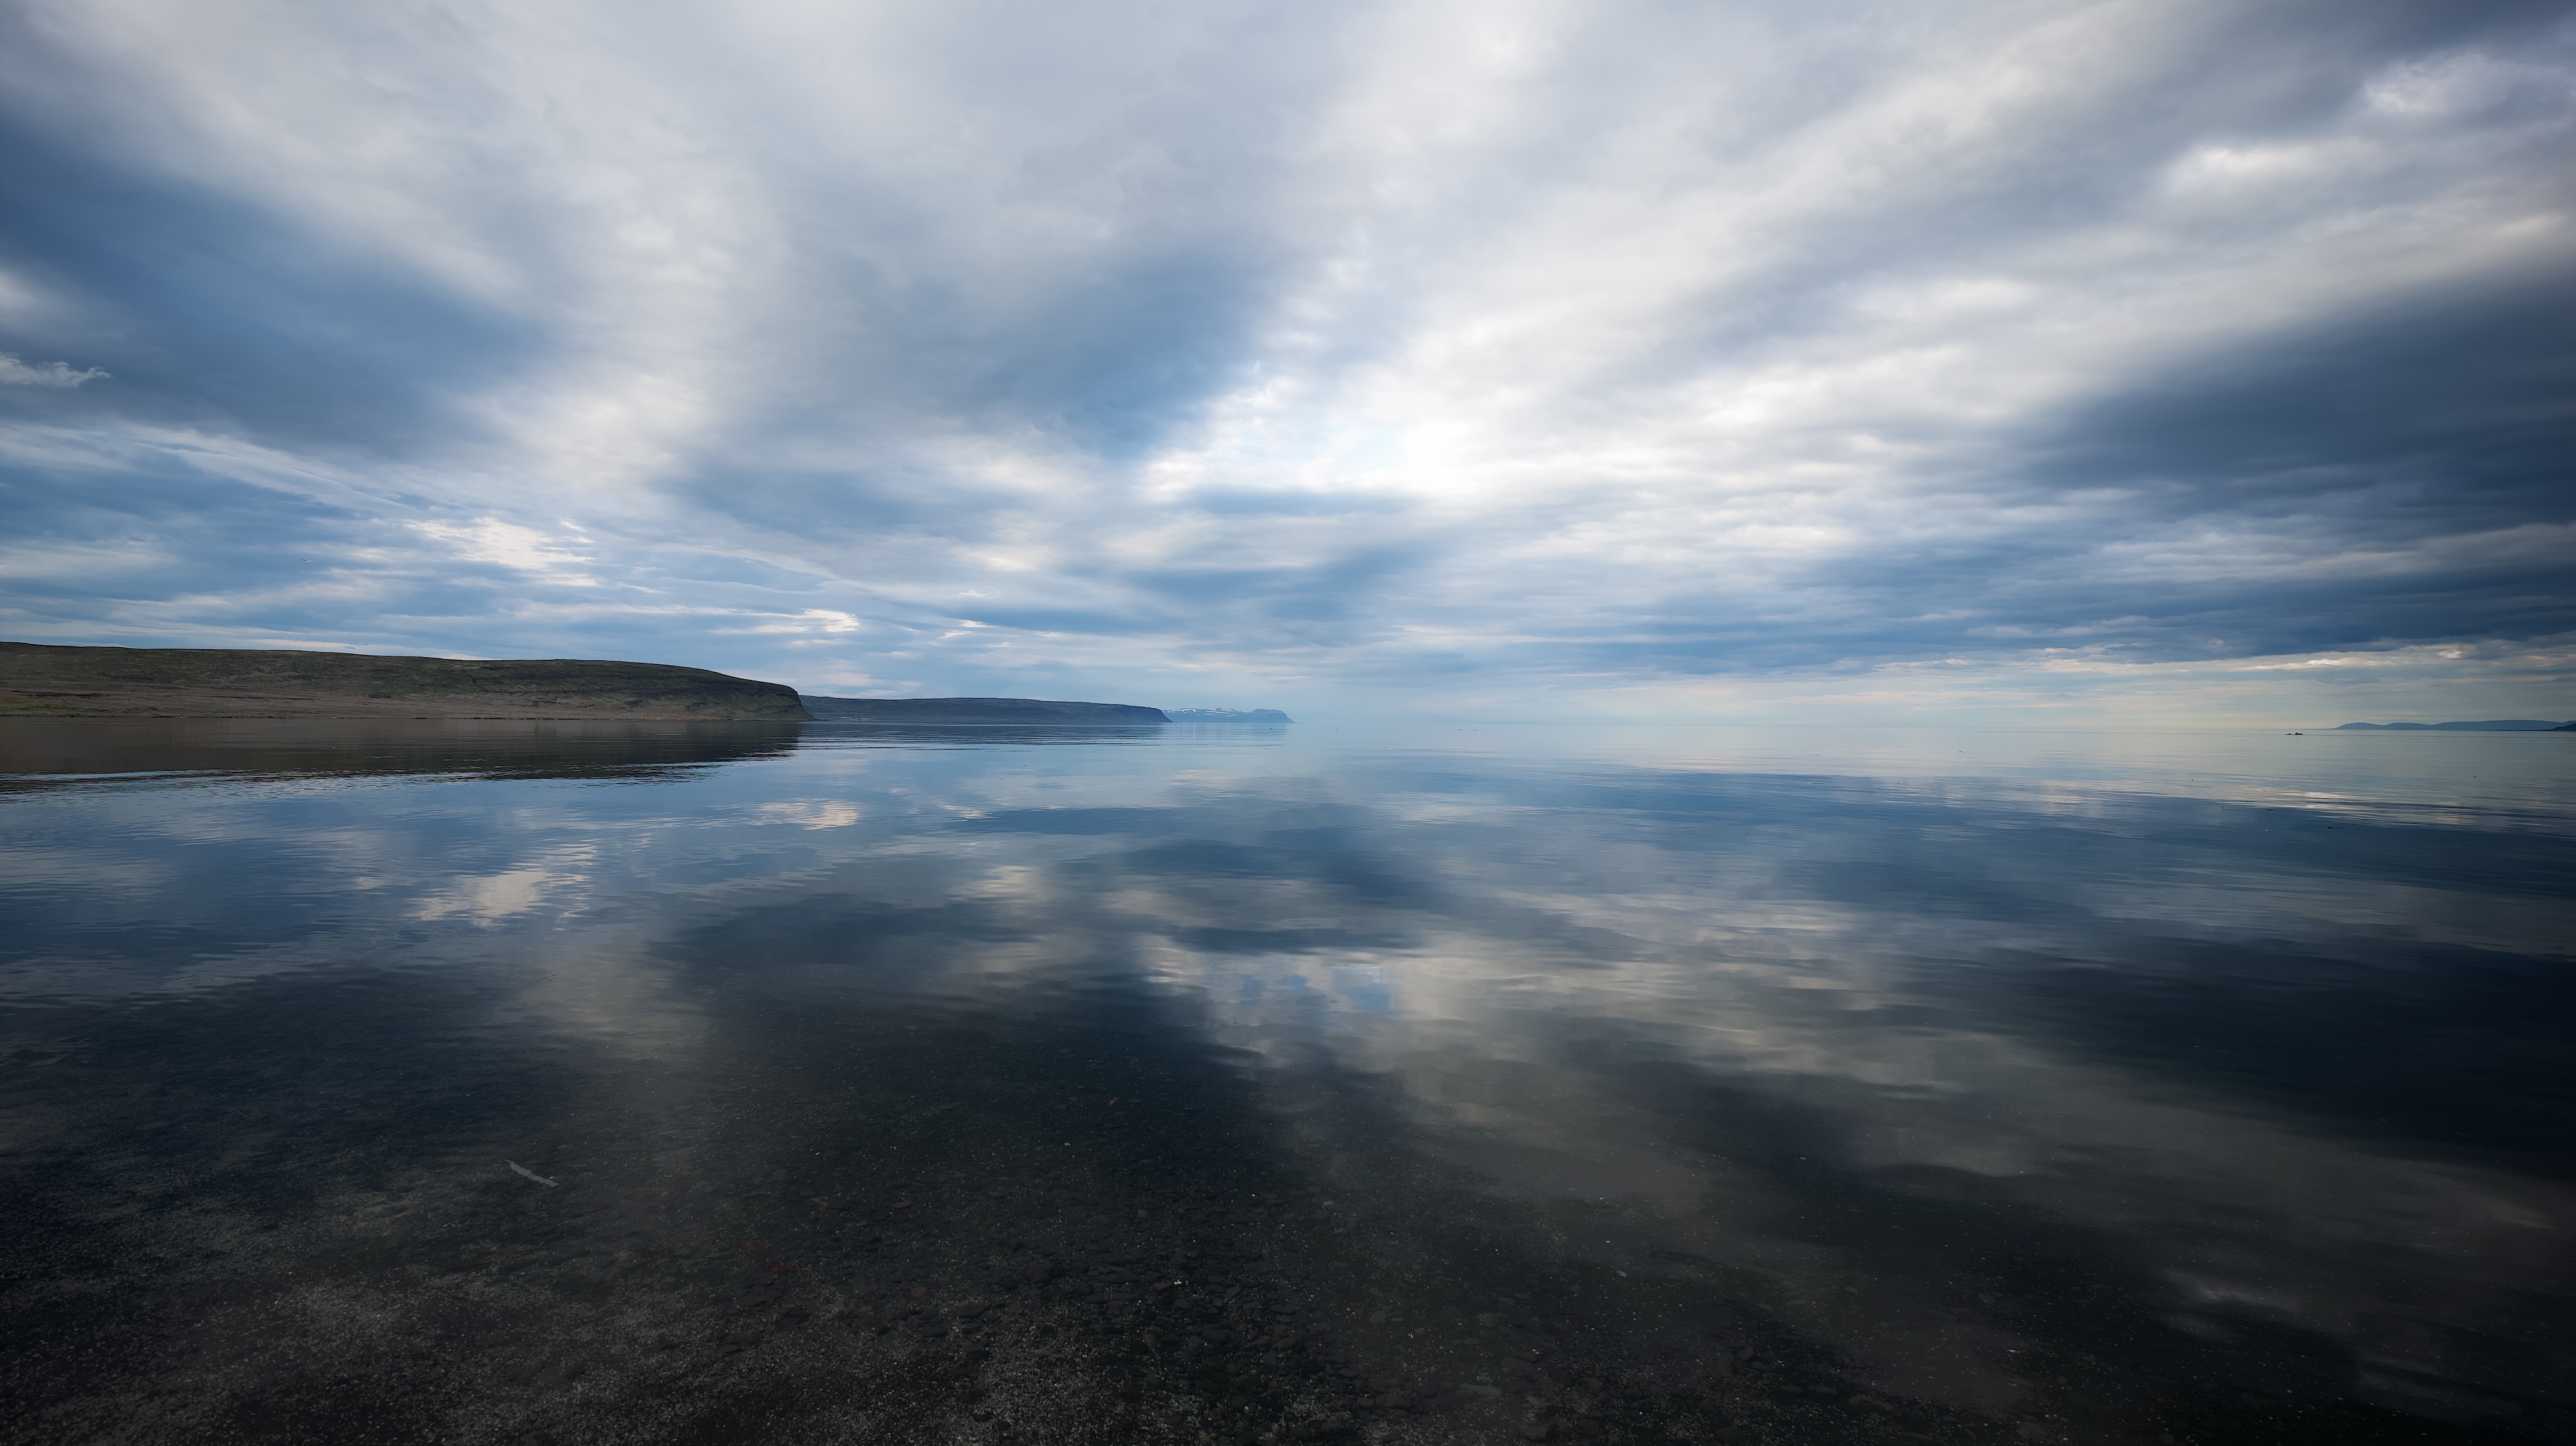 Clouds reflected on a calm sea on the north coast of iceland